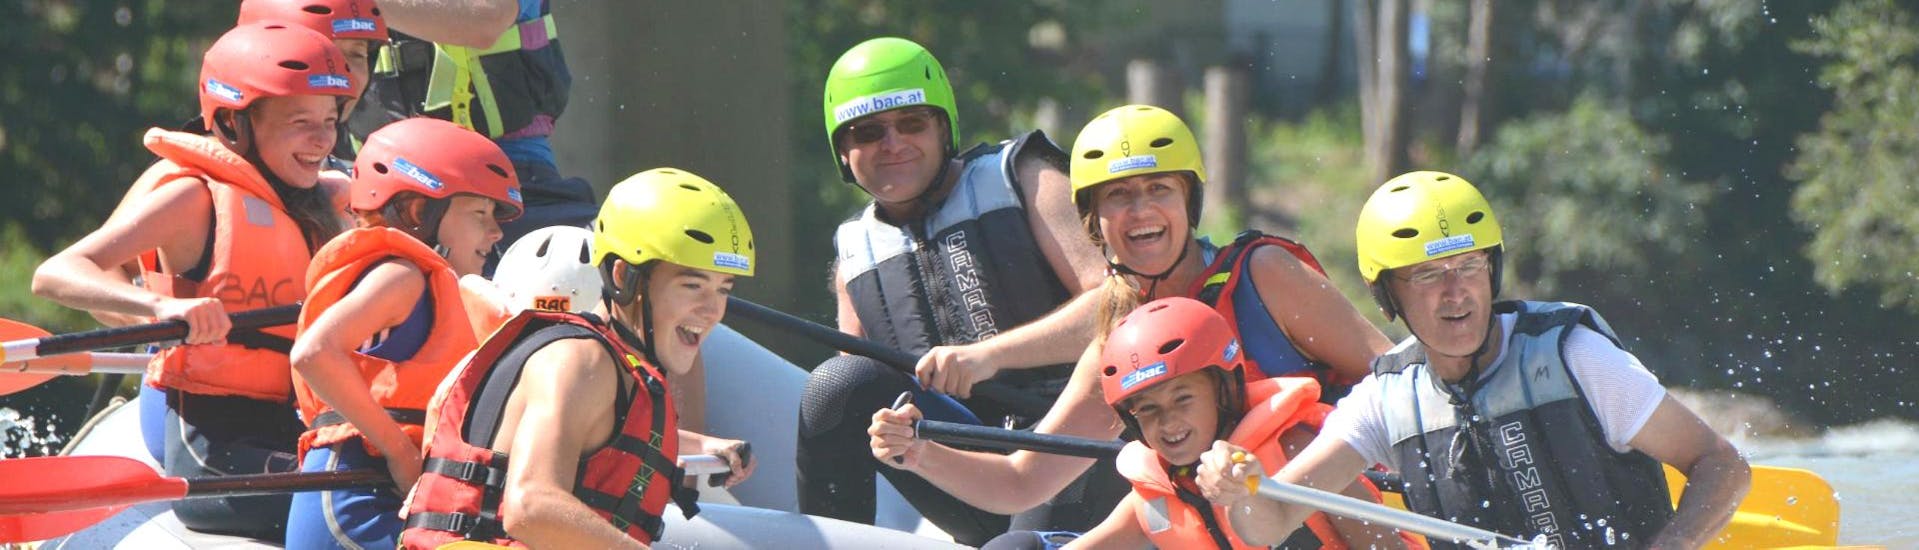 A family is tackling cascades on a raft during the Rafting "Classic" - Enns with the help of an experienced rafting guide from best adventure company.